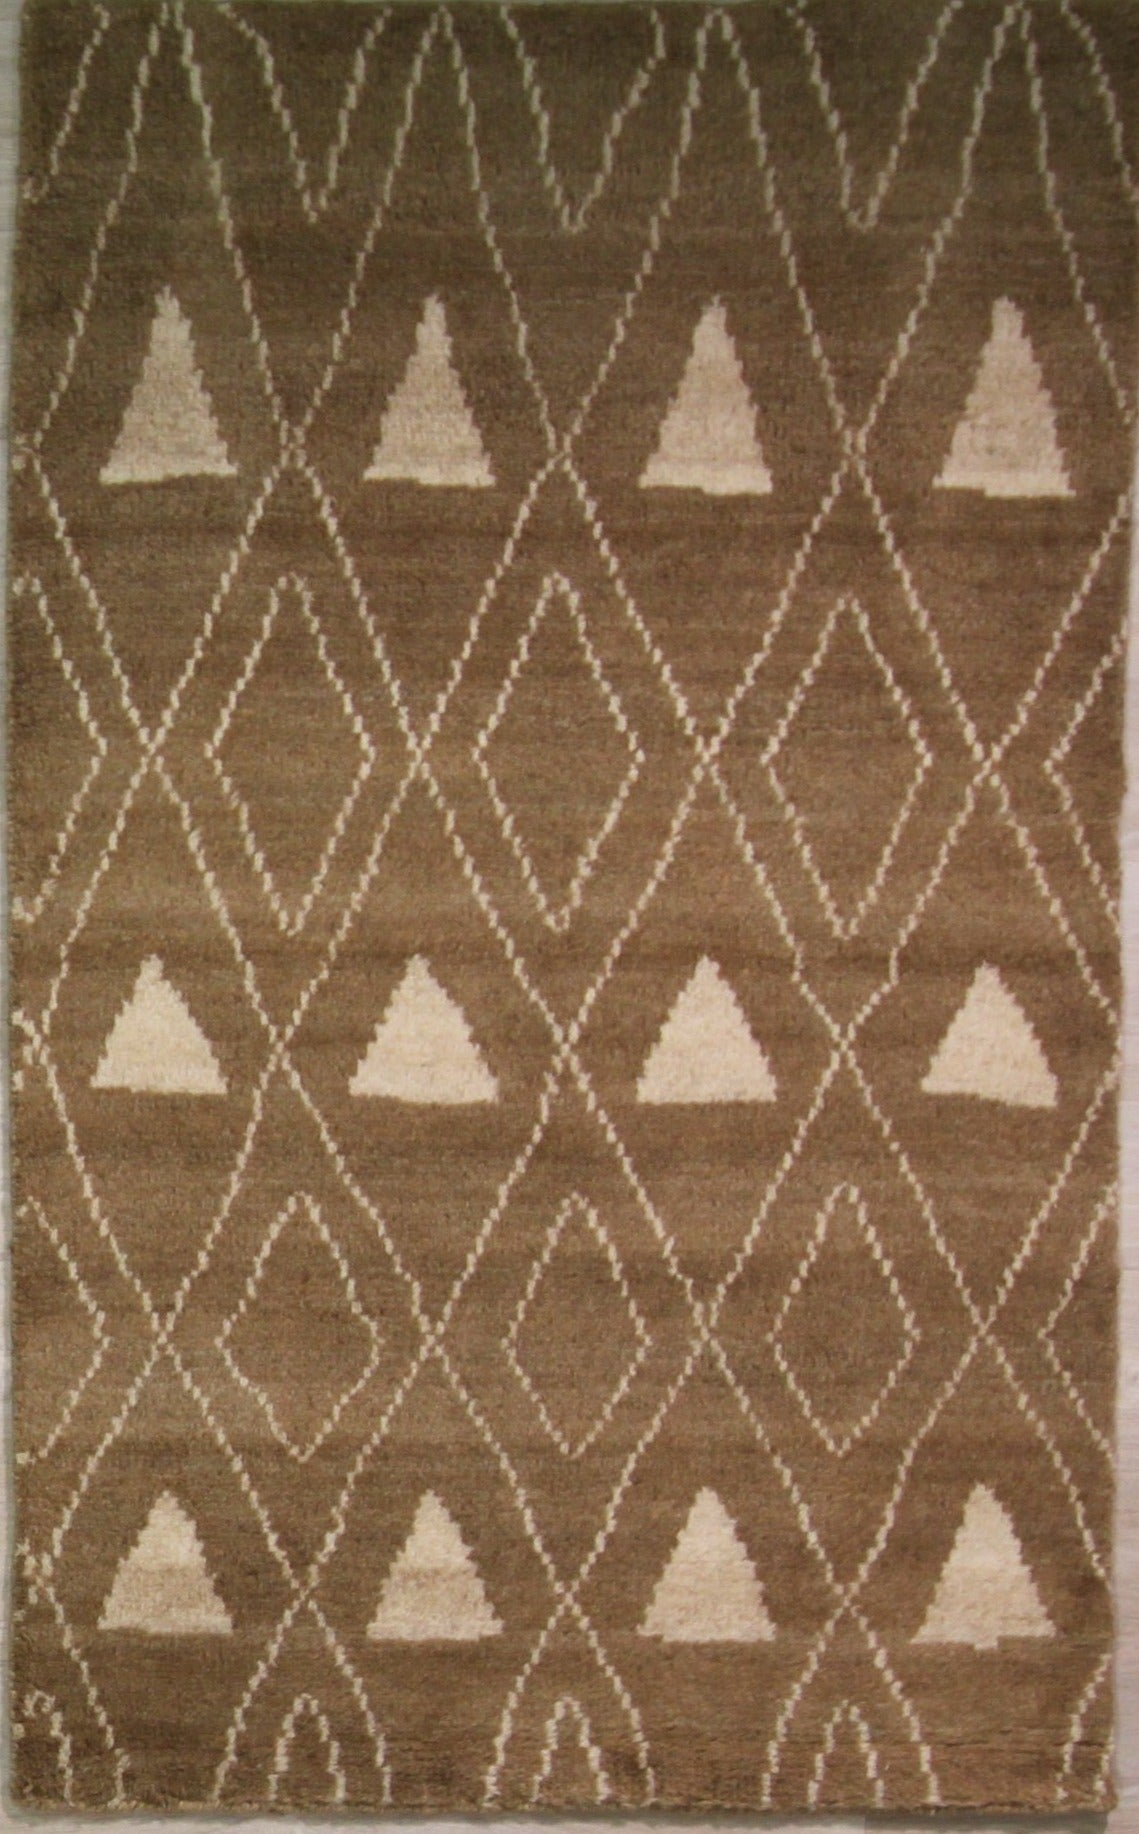 19-MAC: Wool rug - hand knotted